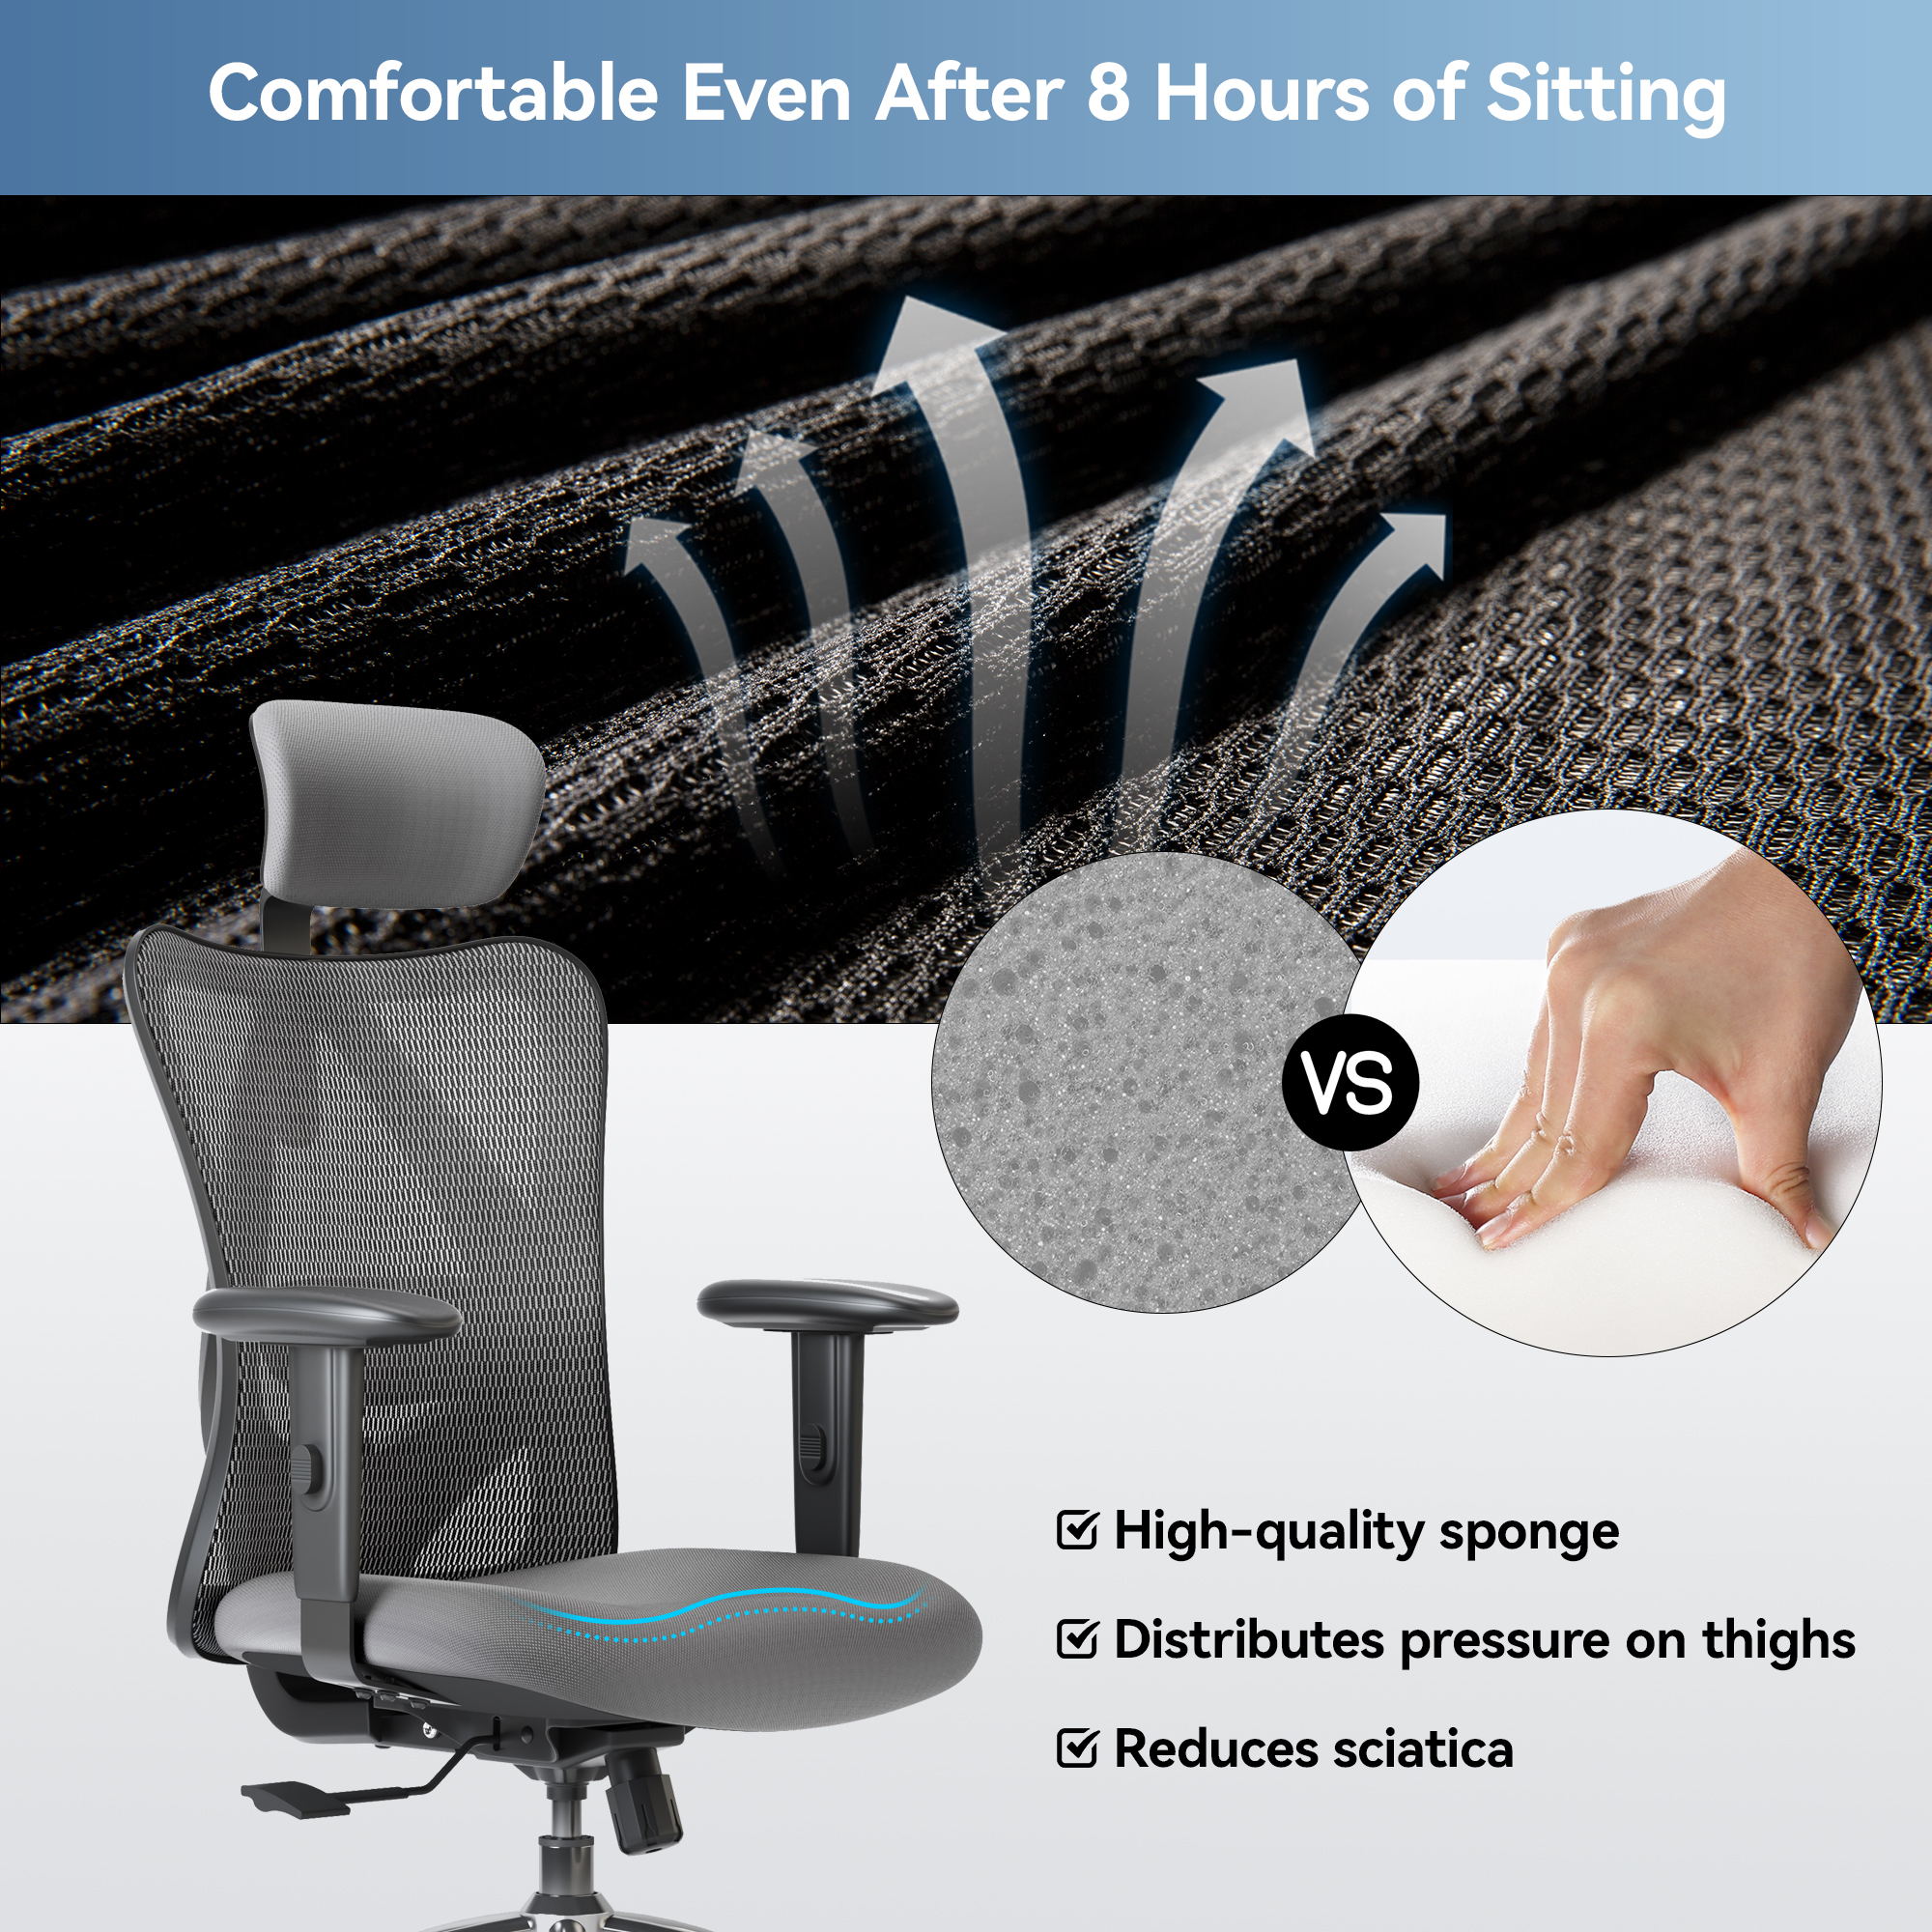 SIHOO Ergonomic High Back Office Chair, Adjustable Computer Desk Chair with Lumbar Support, 300lb, Gray - image 5 of 13